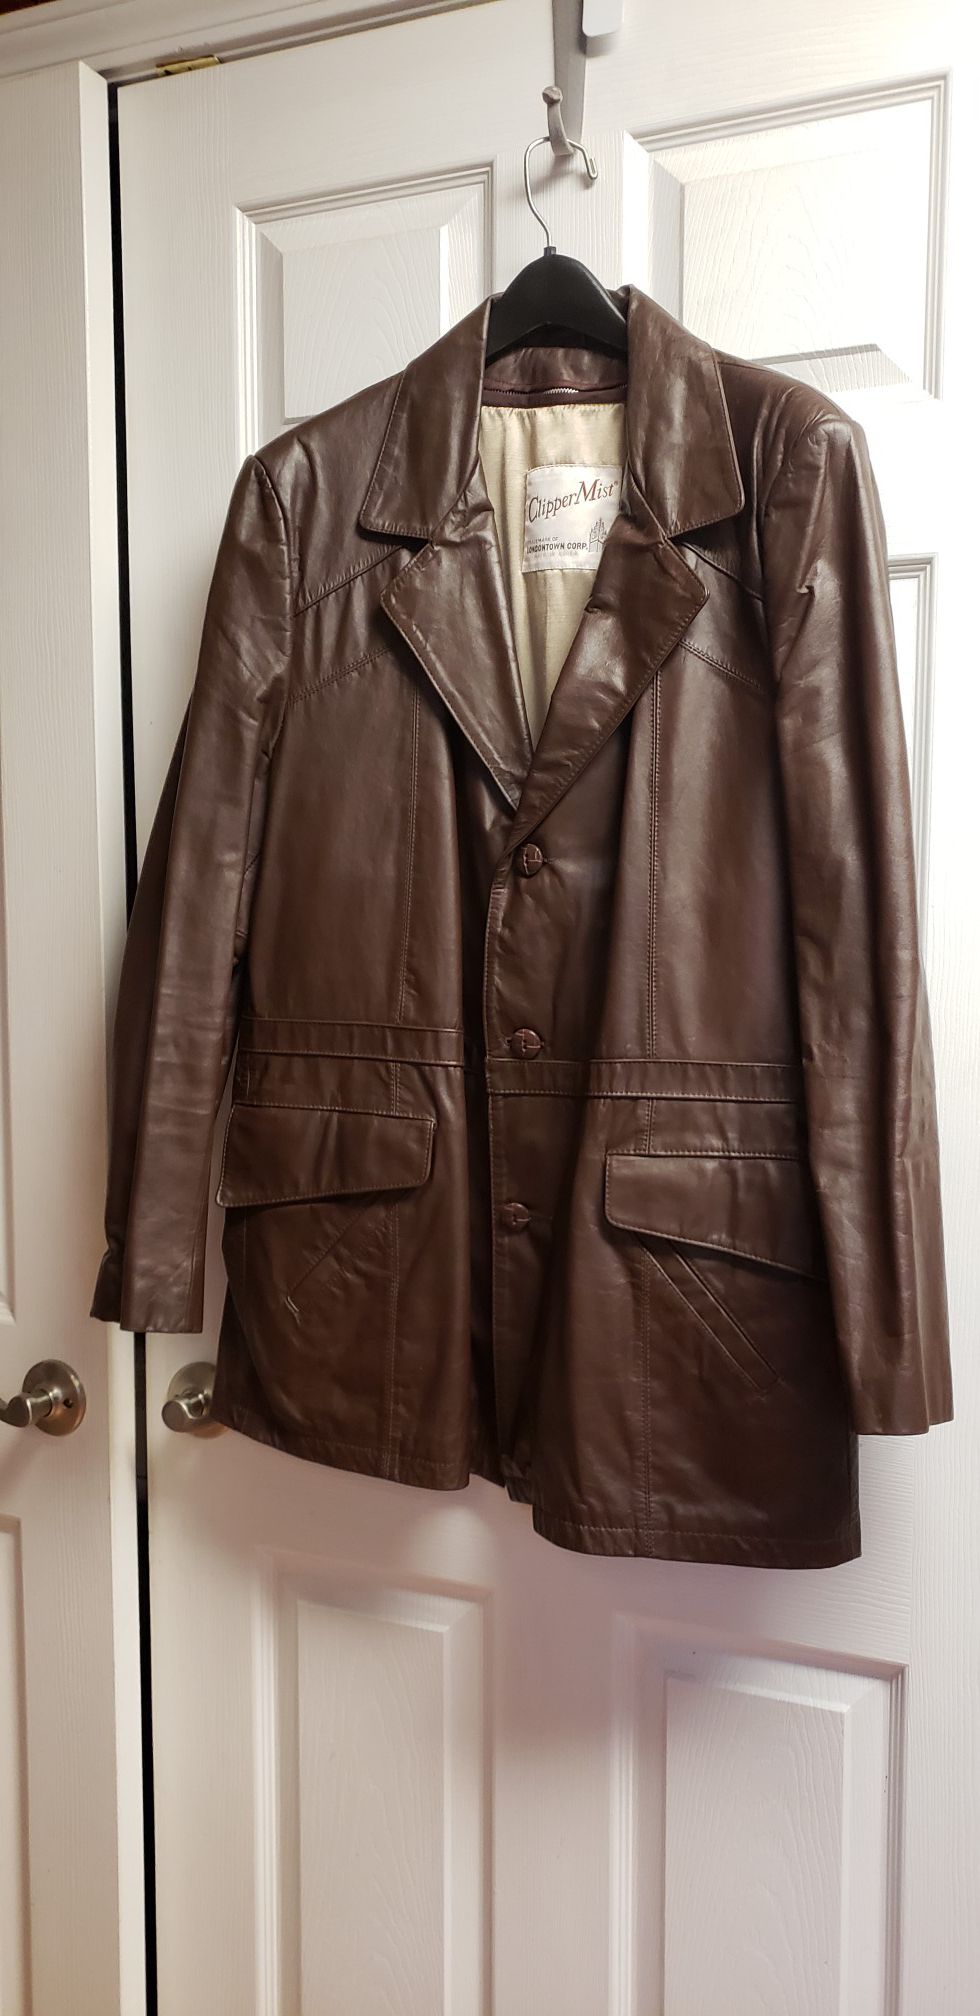 Mens Clipper Mist leather jacket